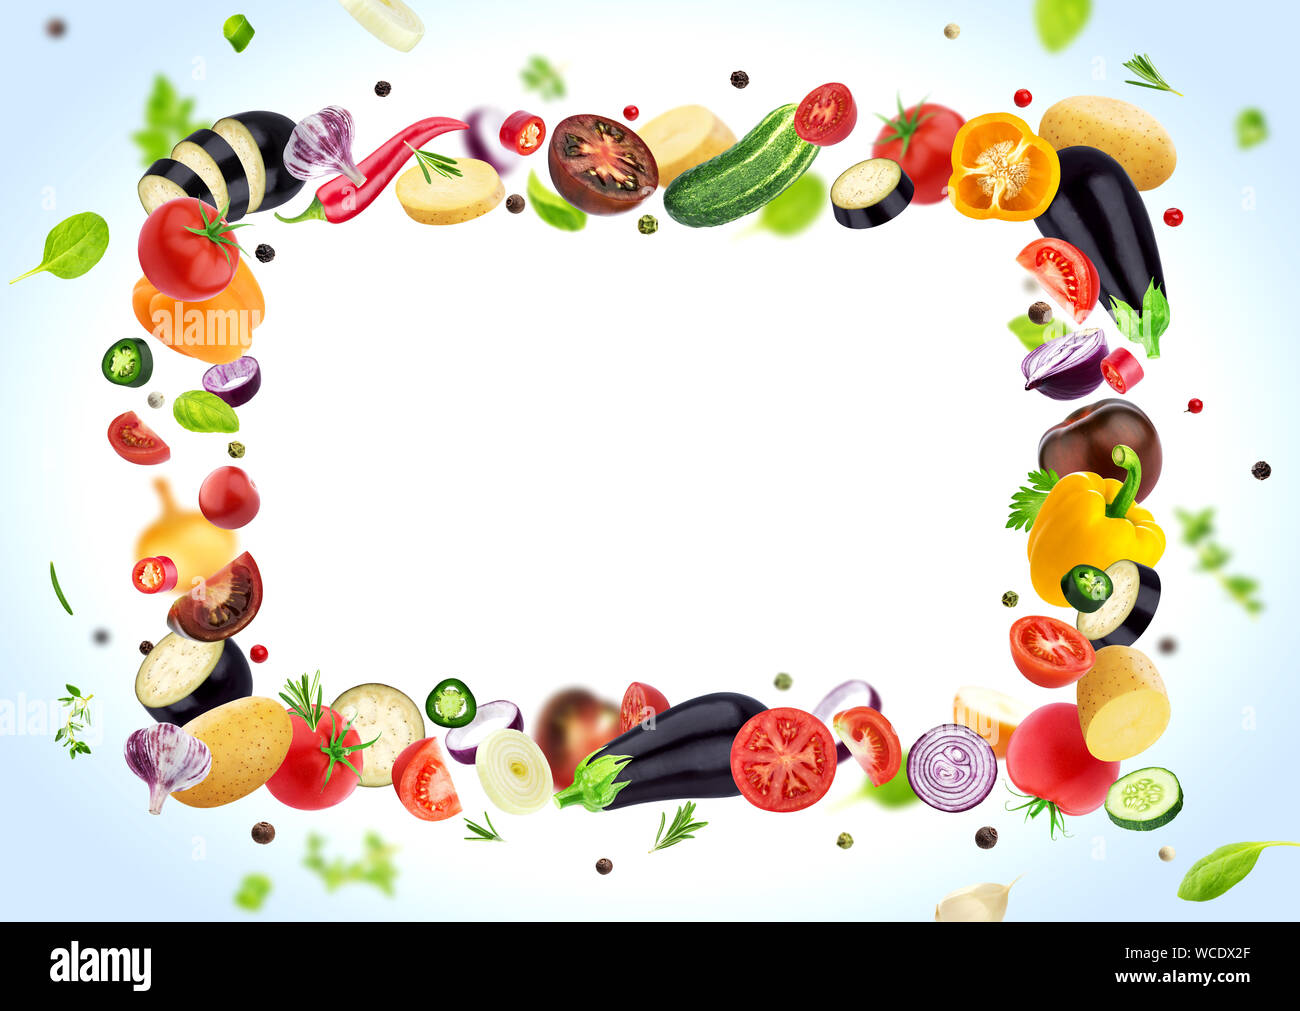 Vegetable isolated on white background, frame made of different flying vegetables, herbs and spices, with copy space Stock Photo